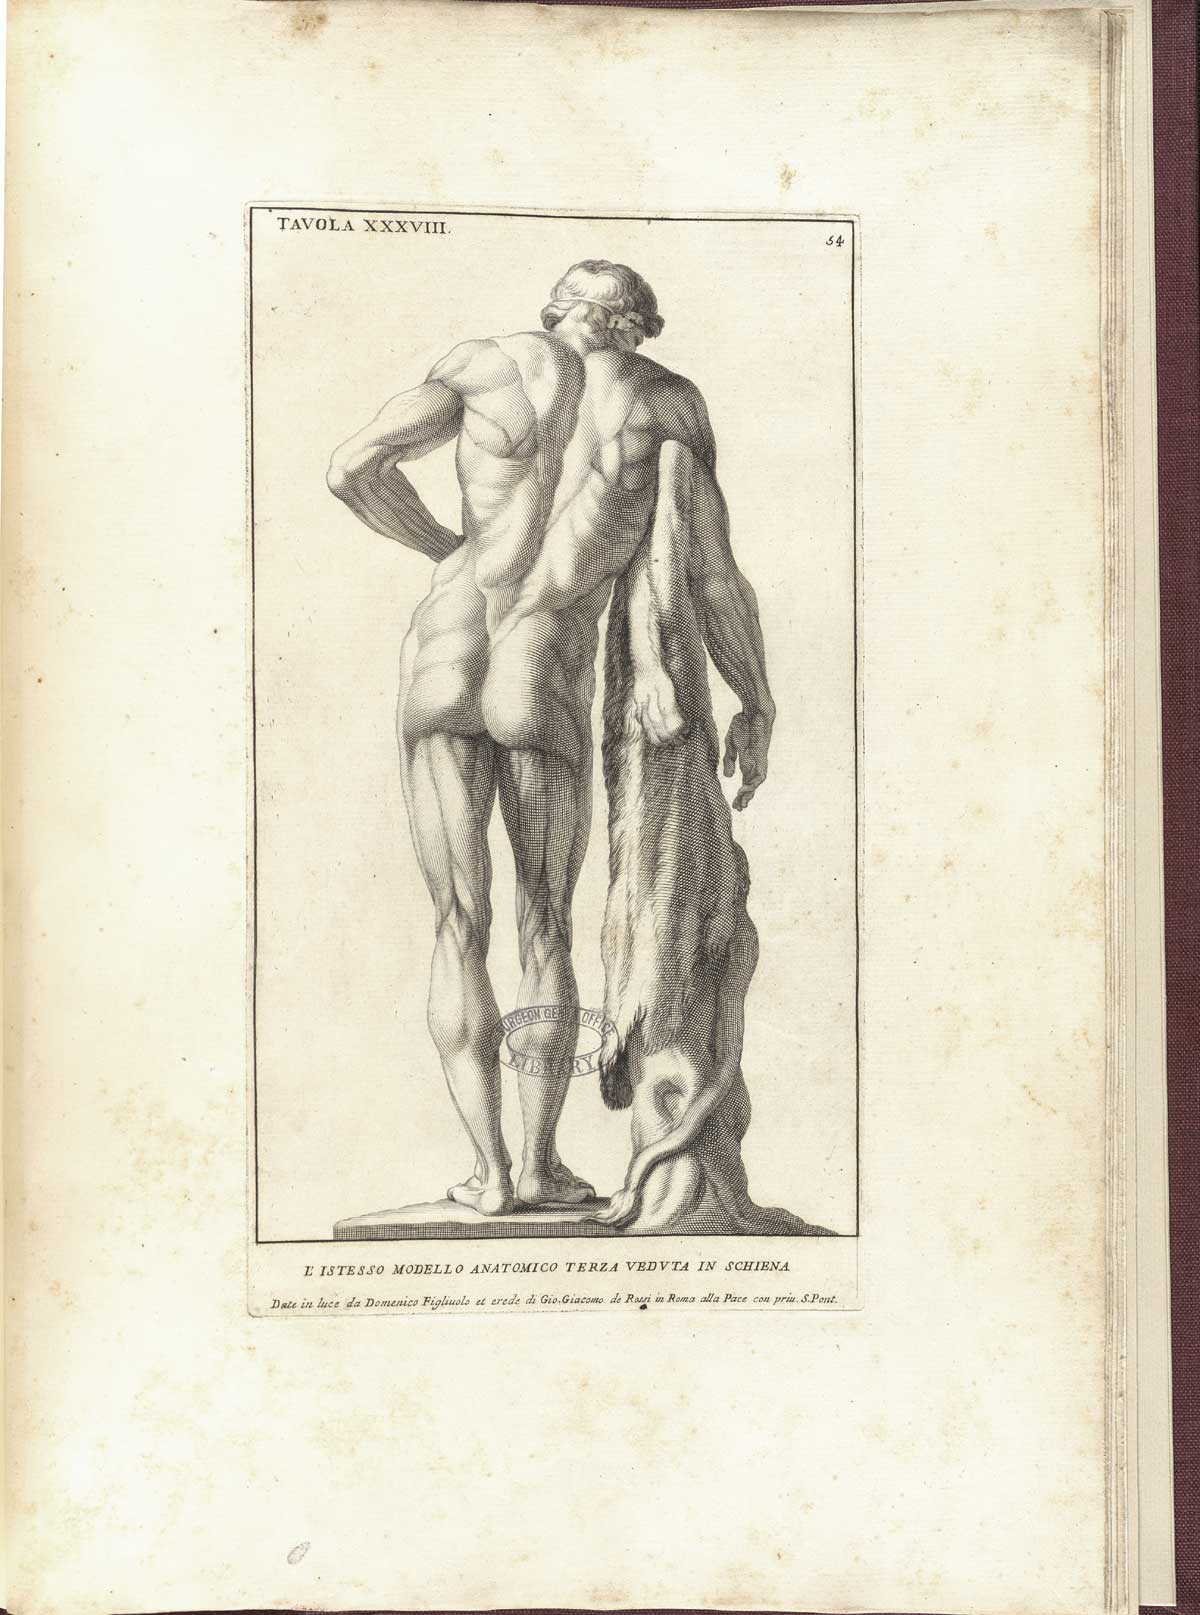 Engraving based on a statue of a faun in the Borghese collection, a standing nude male figure viewed from beind with prominent musculature with left had behind his back and leaning with his right arm on a post or tree; from Bernardino Genga’s Anatomia per uso et intelligenza del disegno, NLM Call no.: WZ 250 G329an 1691.